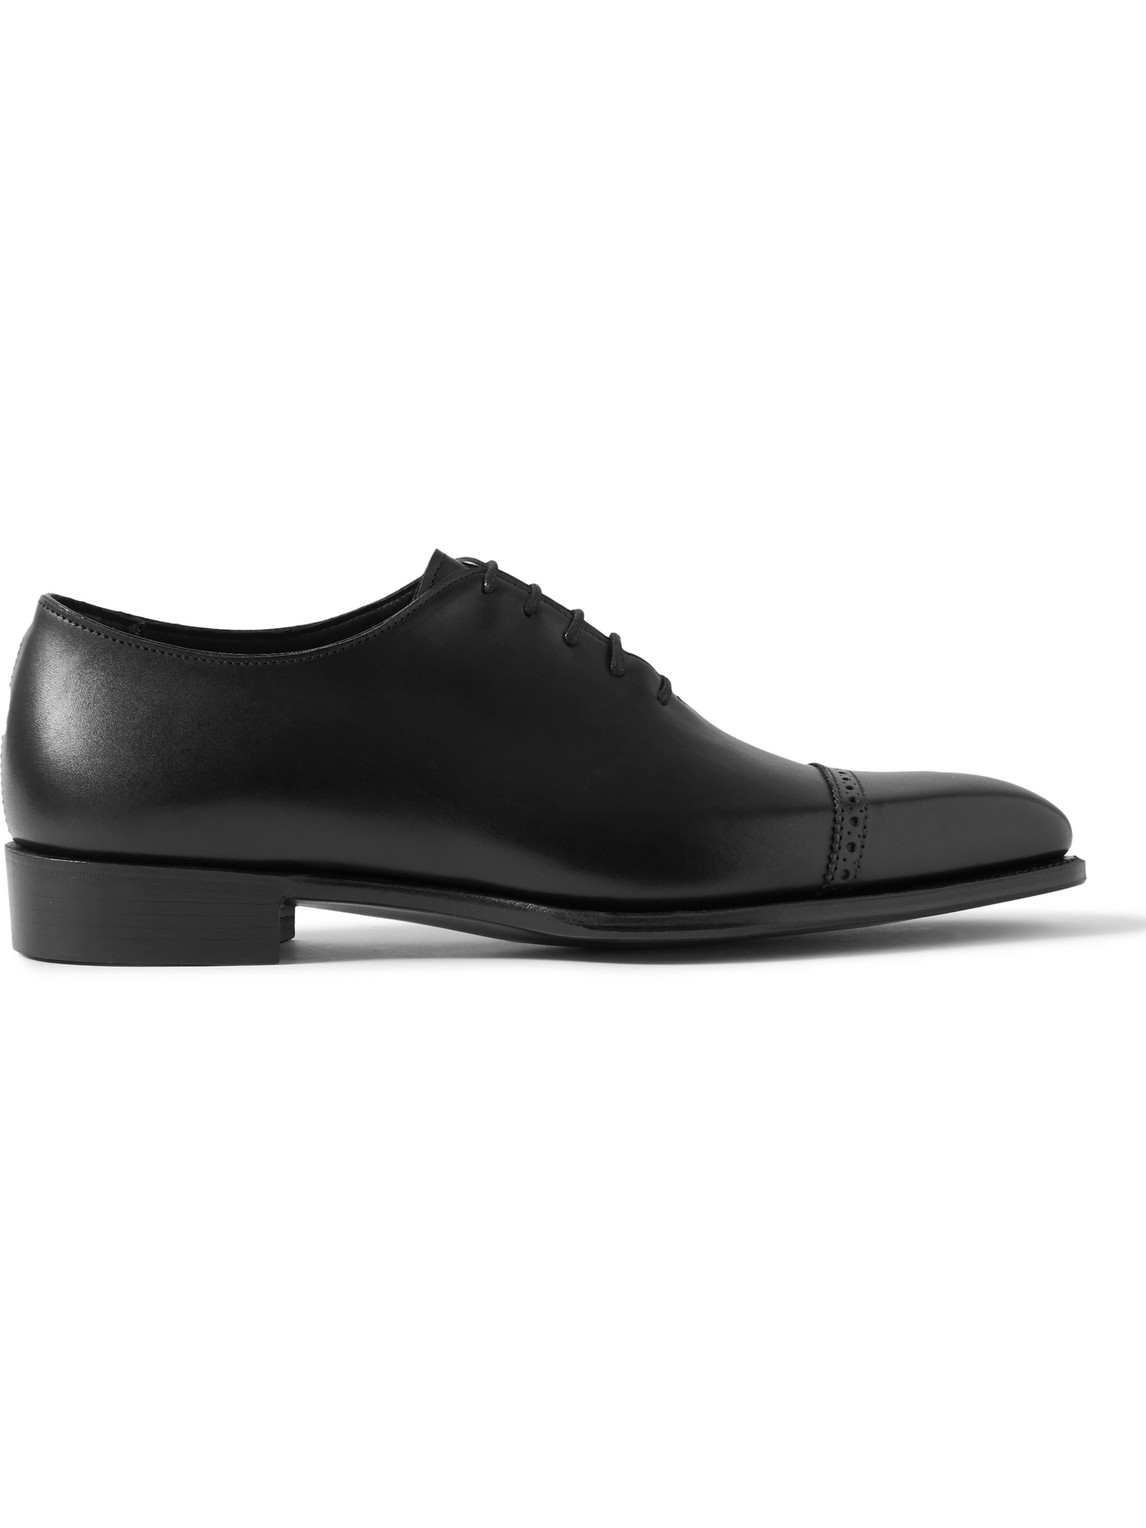 George Cleverley Melvin Cap-toe Leather Oxford Shoes In Black